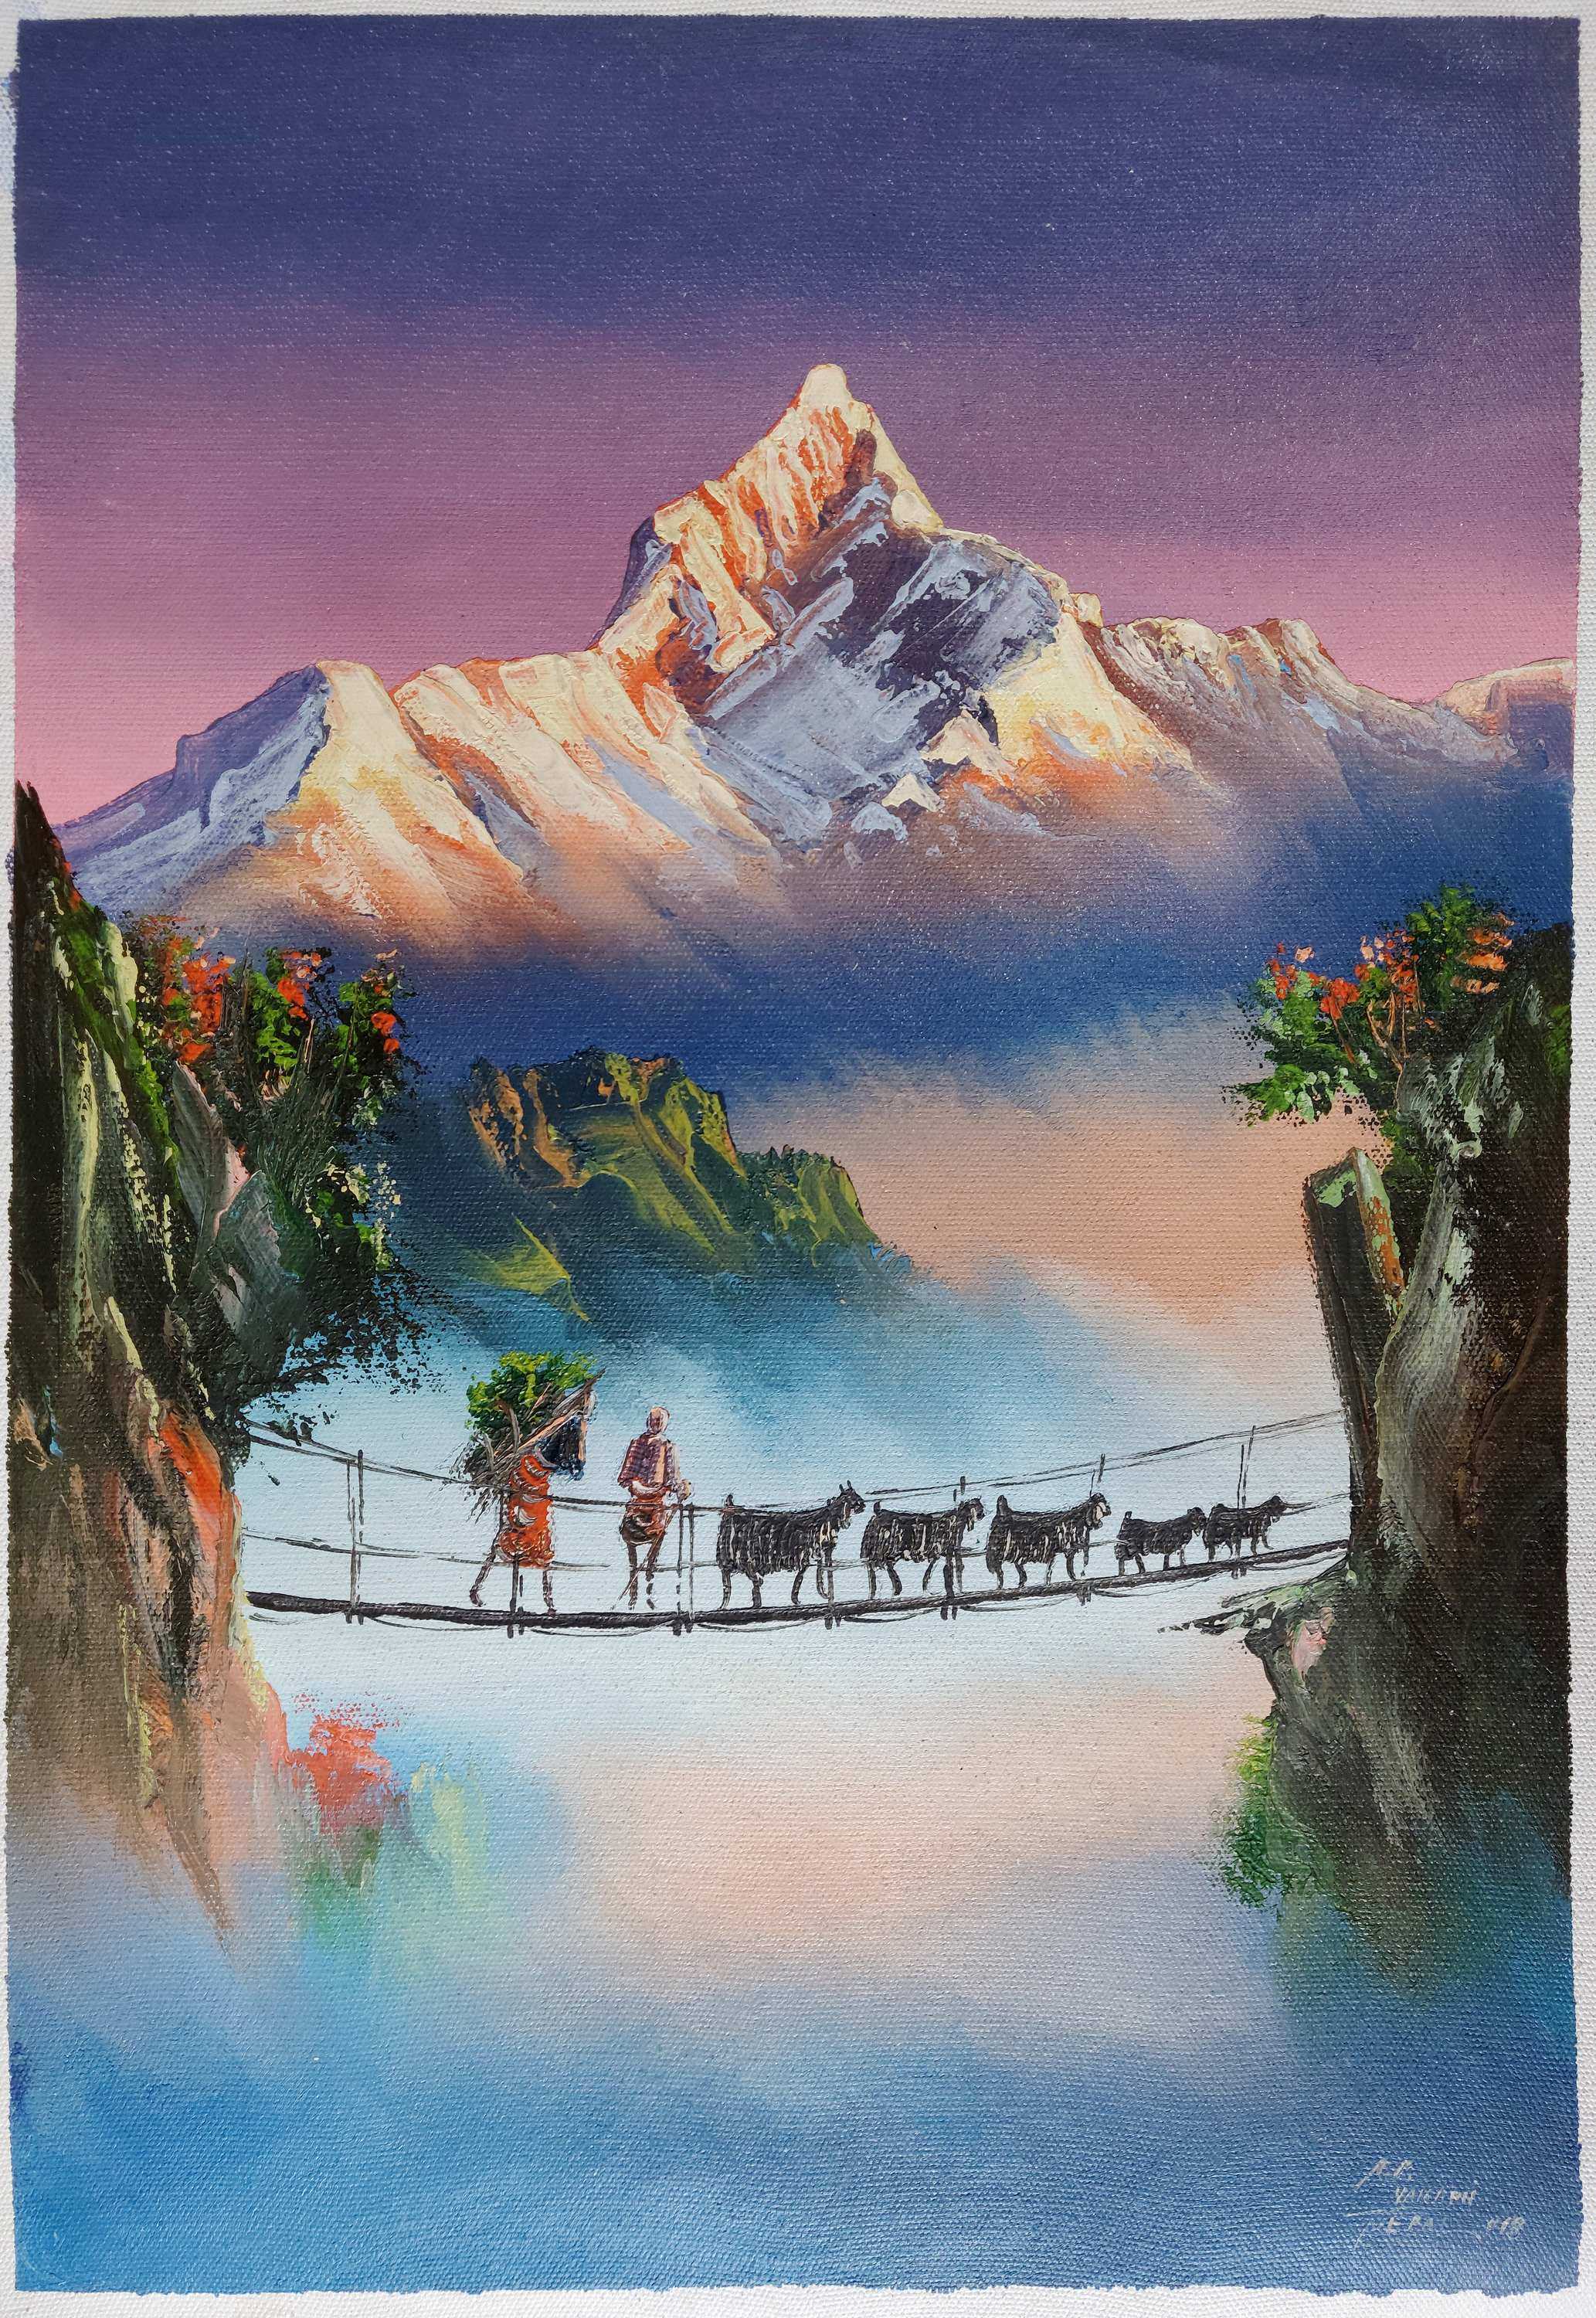 Painting Of Himalayan Region Lifestyle And Beautiful Fishtail Mountain [oil Color On Canvas]